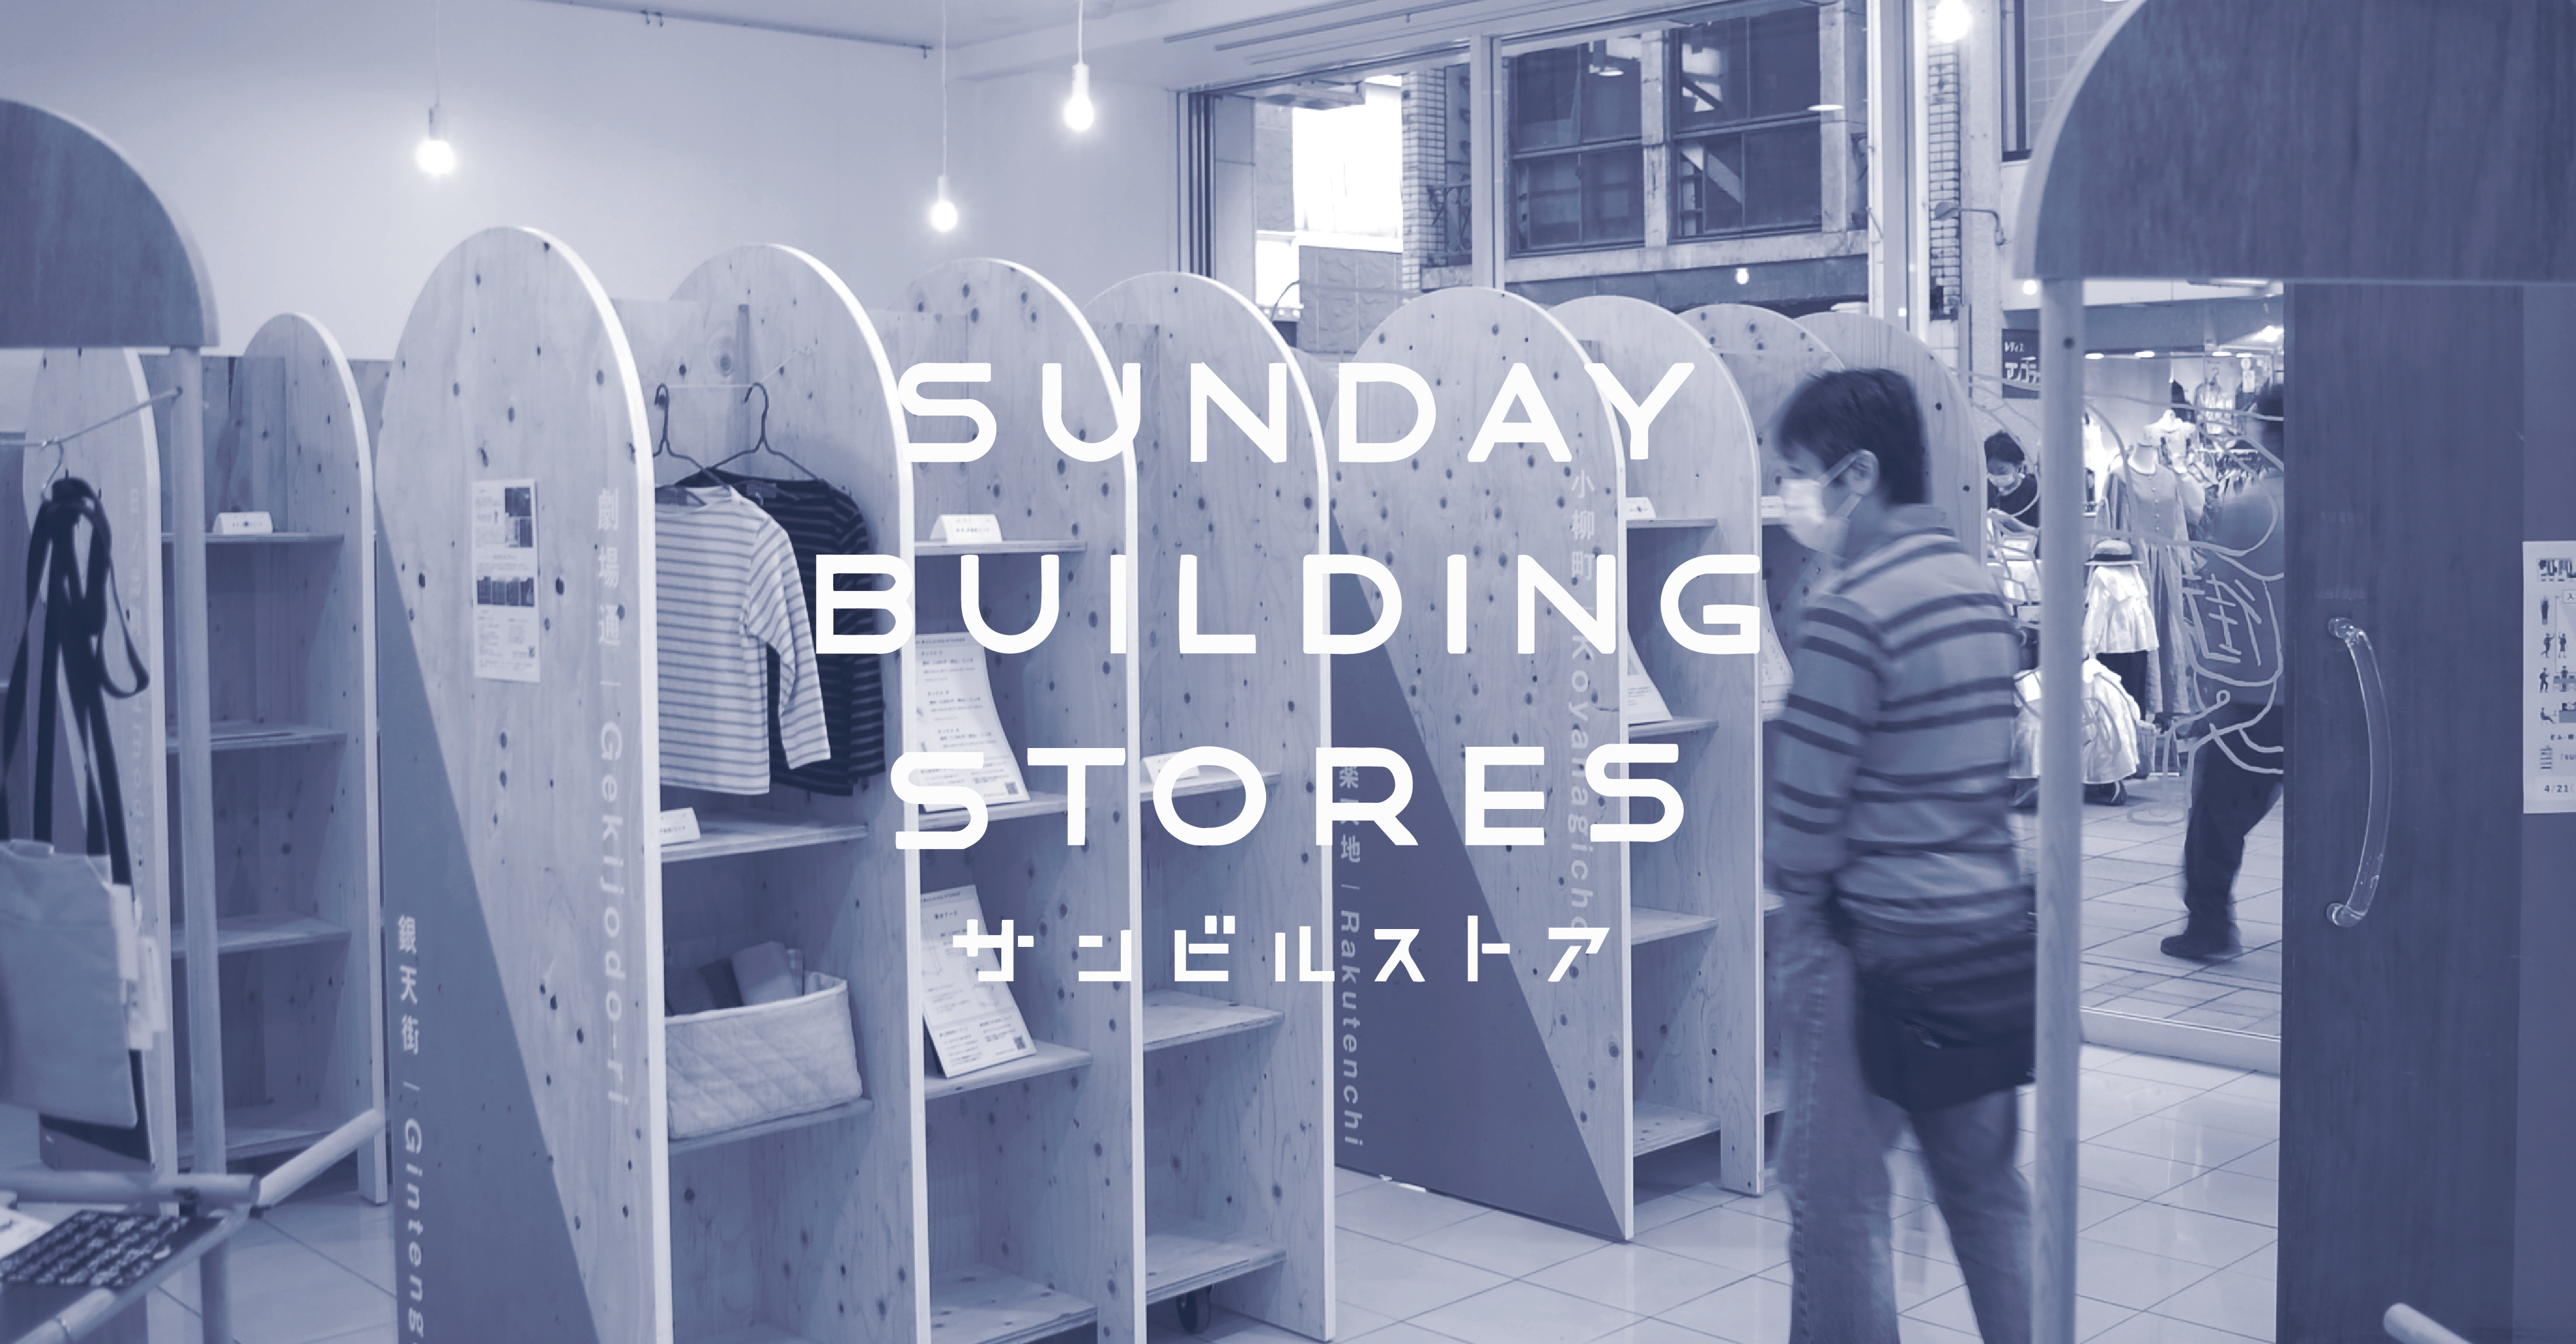 SUNDAY BUILDING STORES